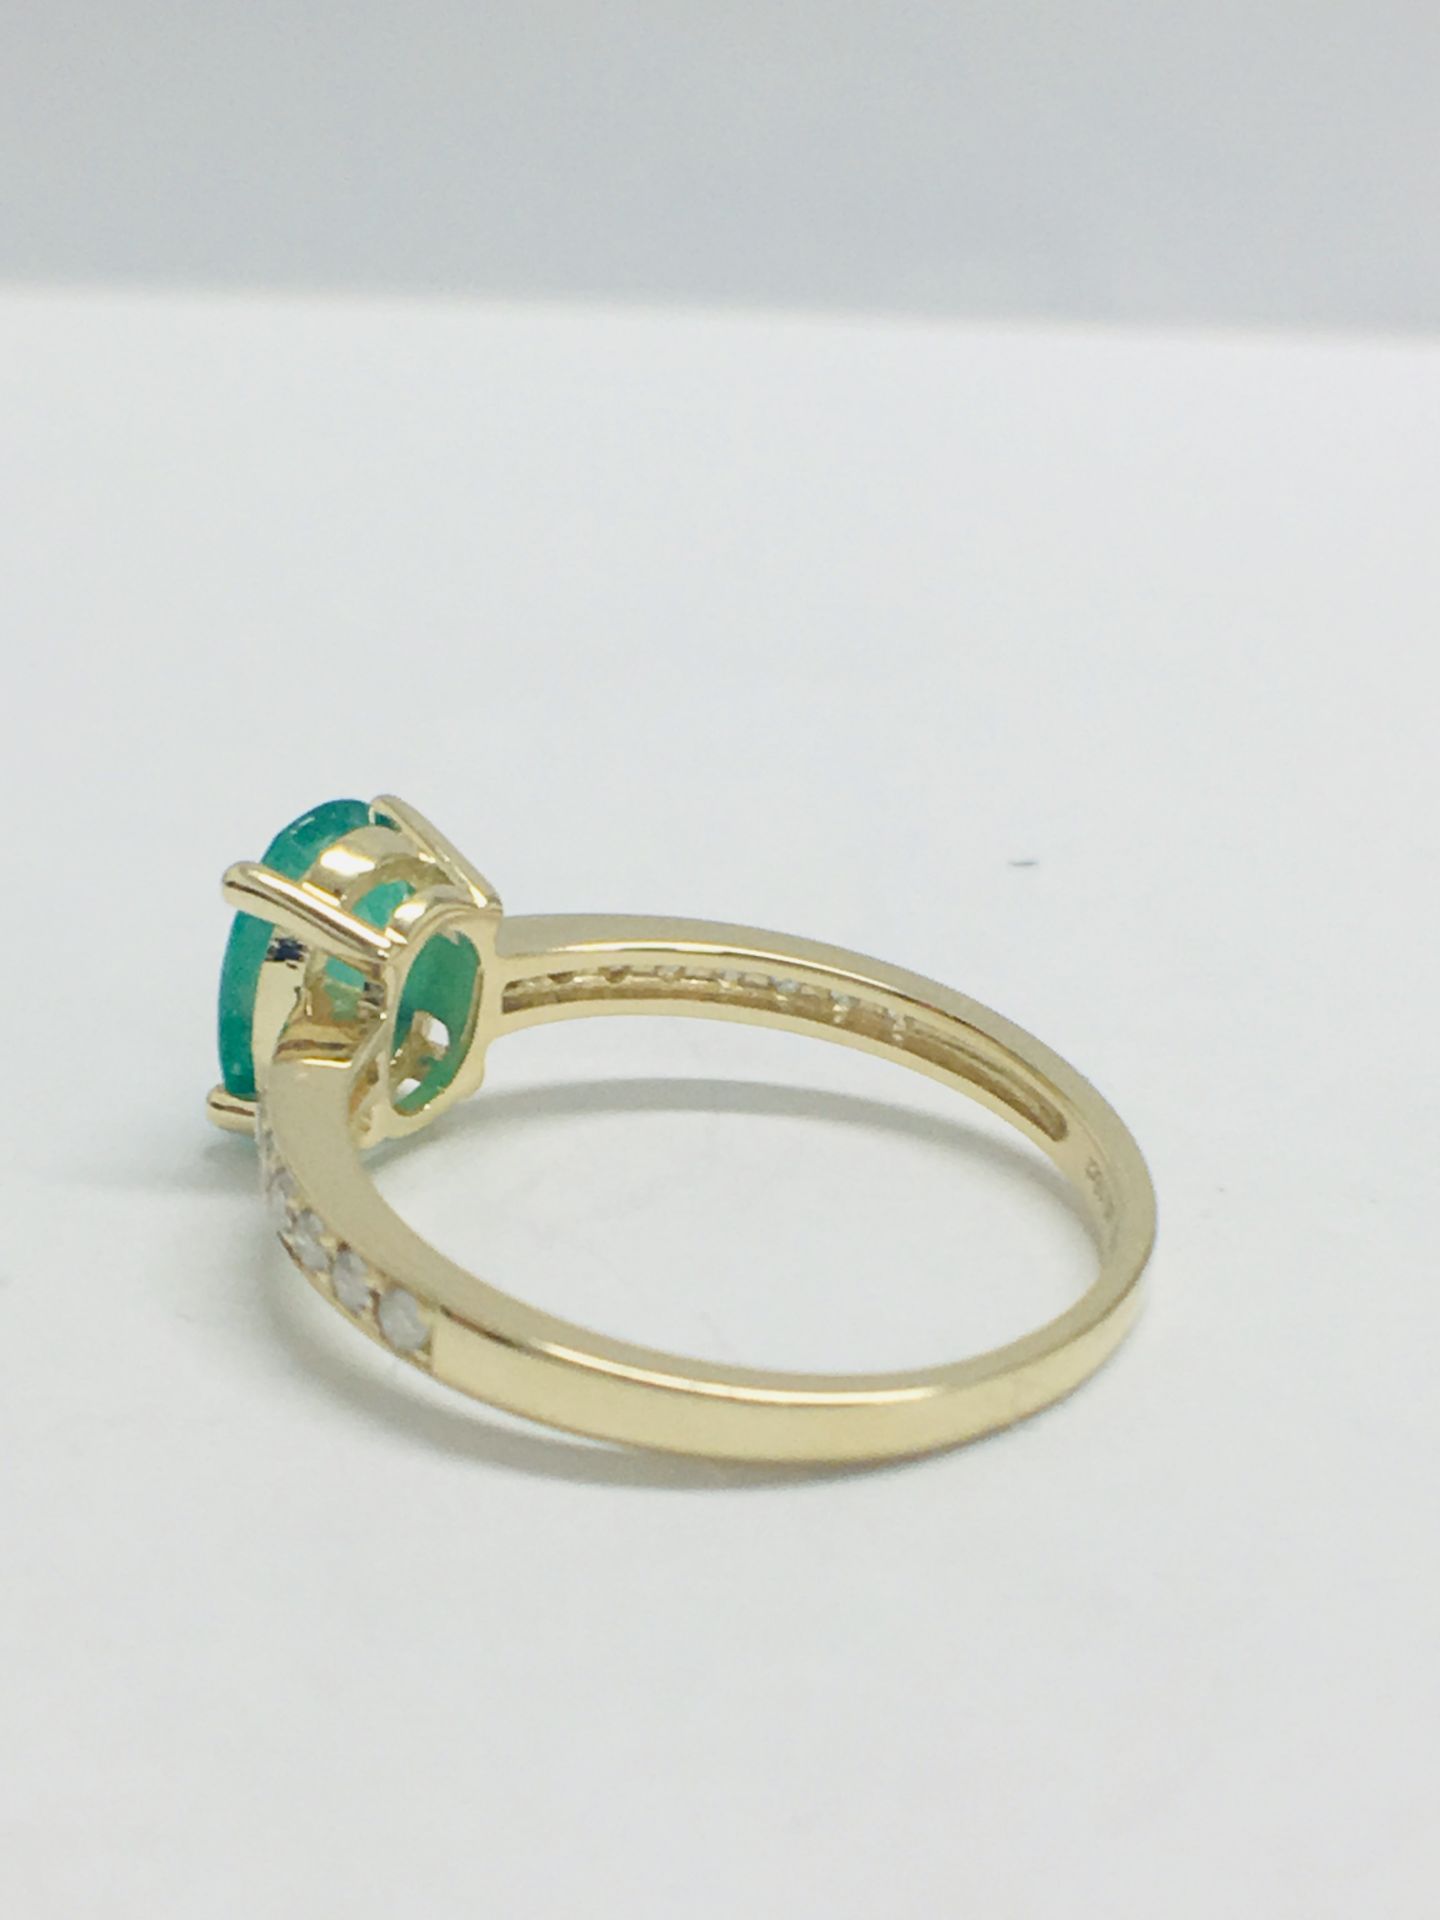 14ct Yellow Gold Emerald and Diamond Ring - Image 5 of 7